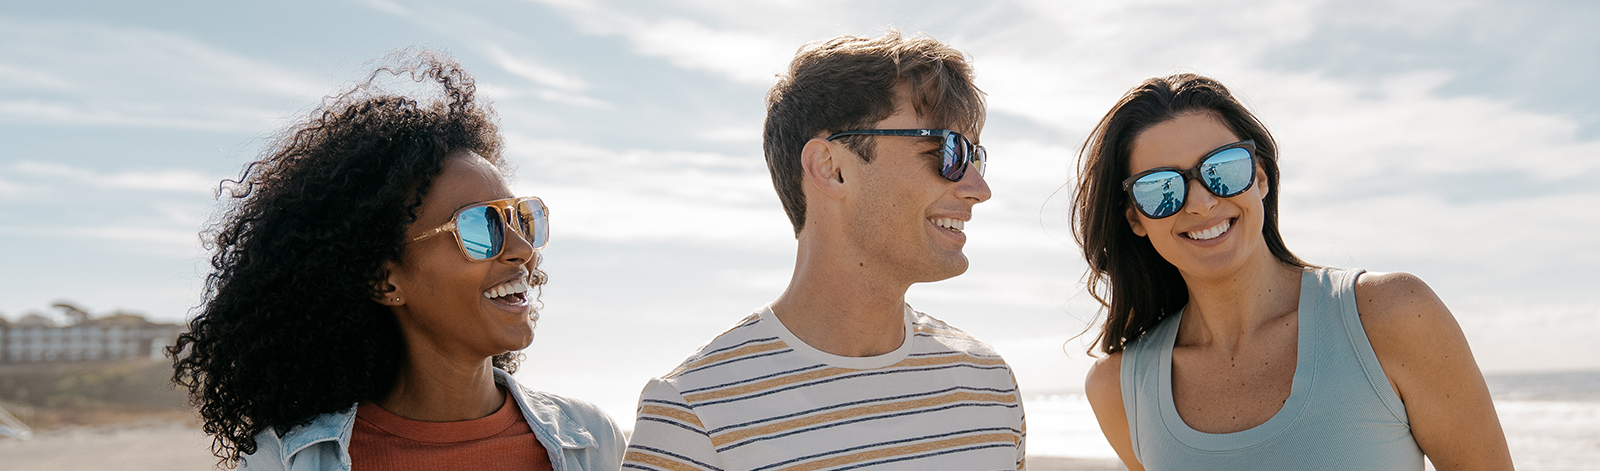 Guy and girl wearing Knockaround sunglasses at the beach